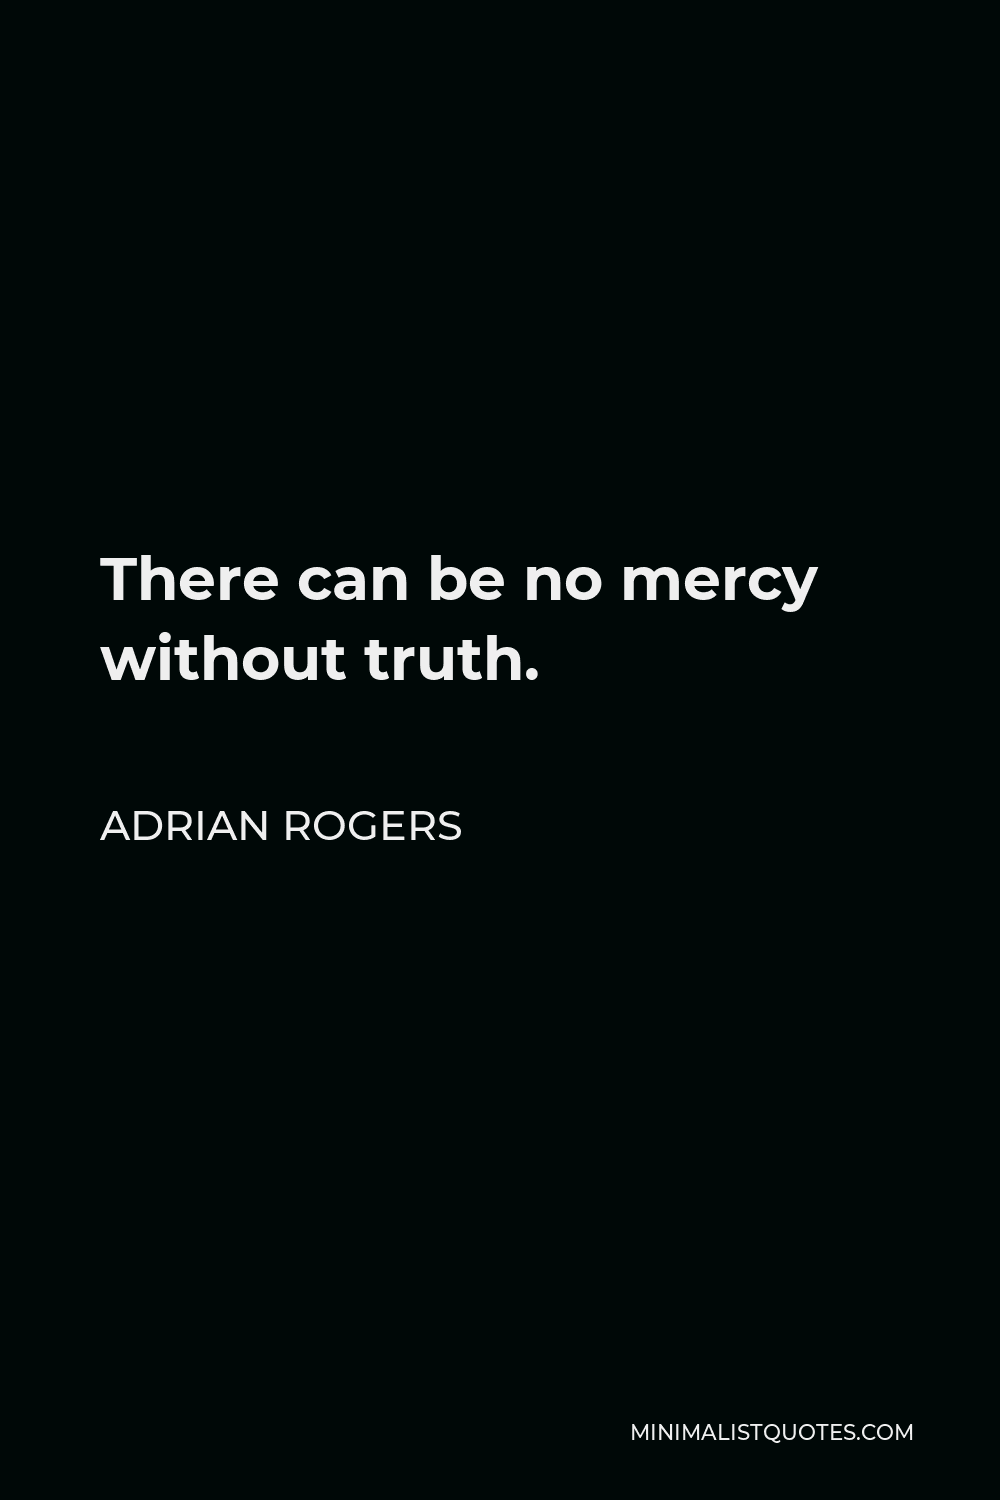 Adrian Rogers Quote - There can be no mercy without truth.